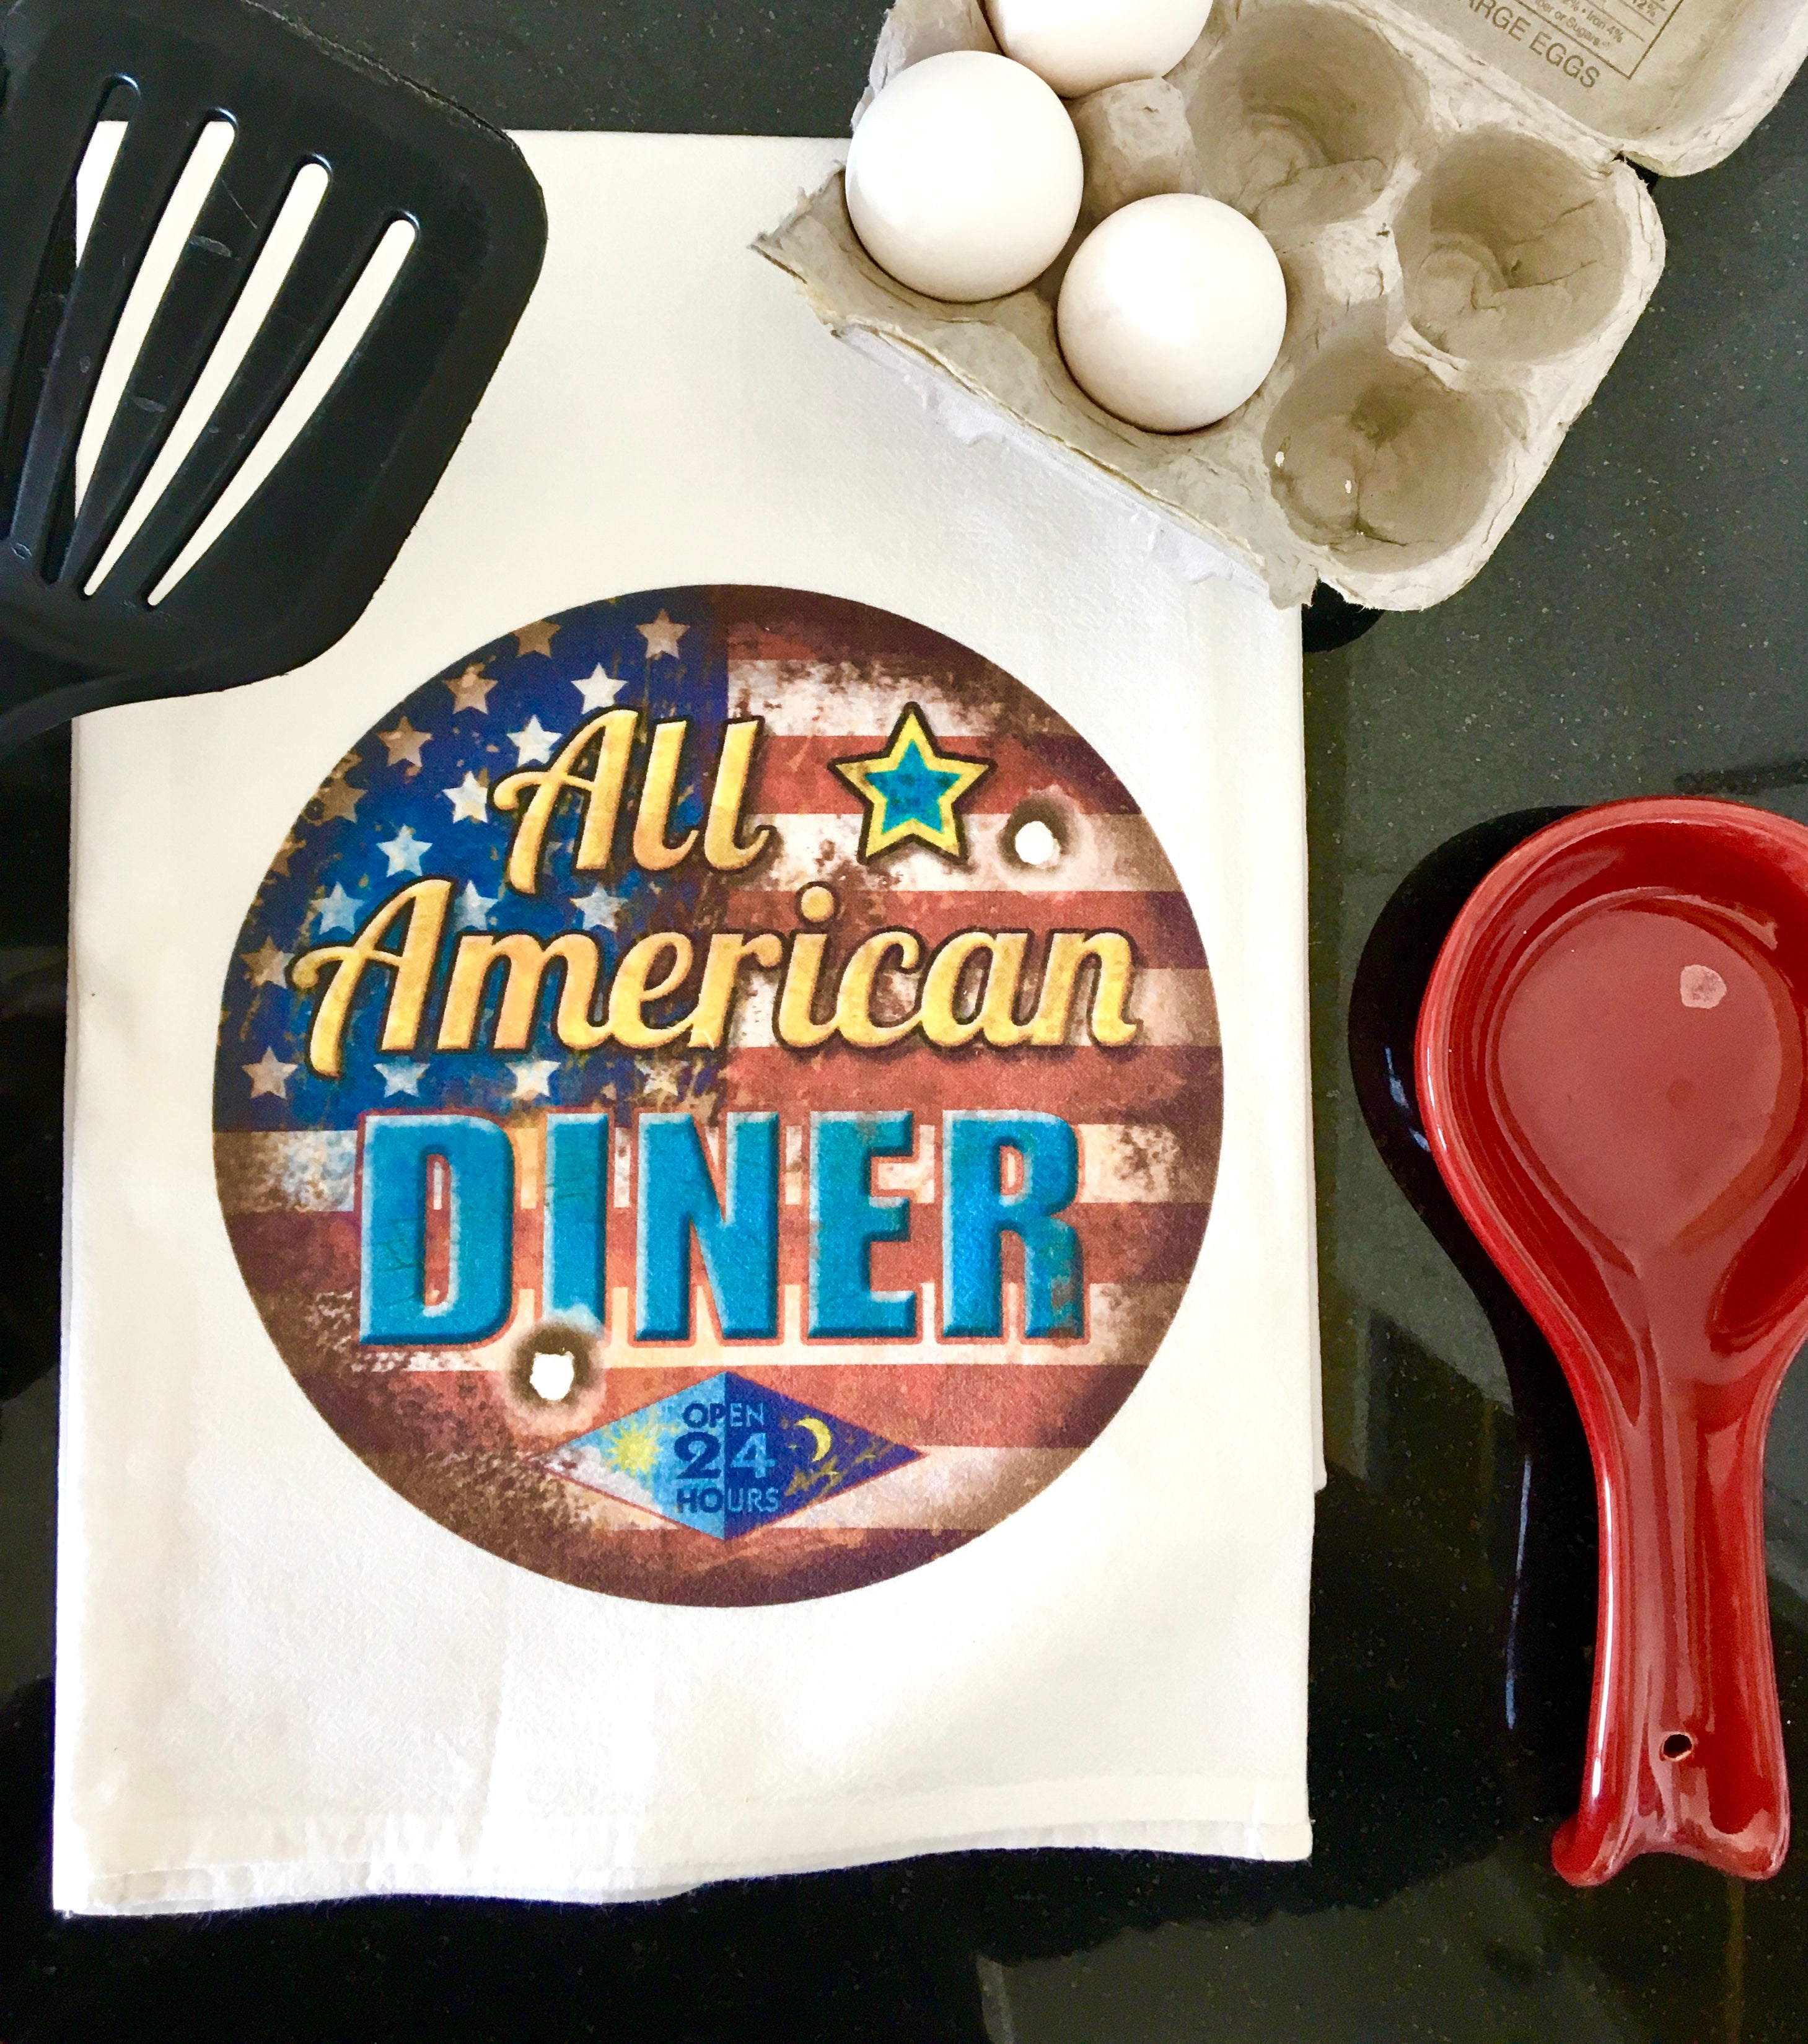 All-American Diner